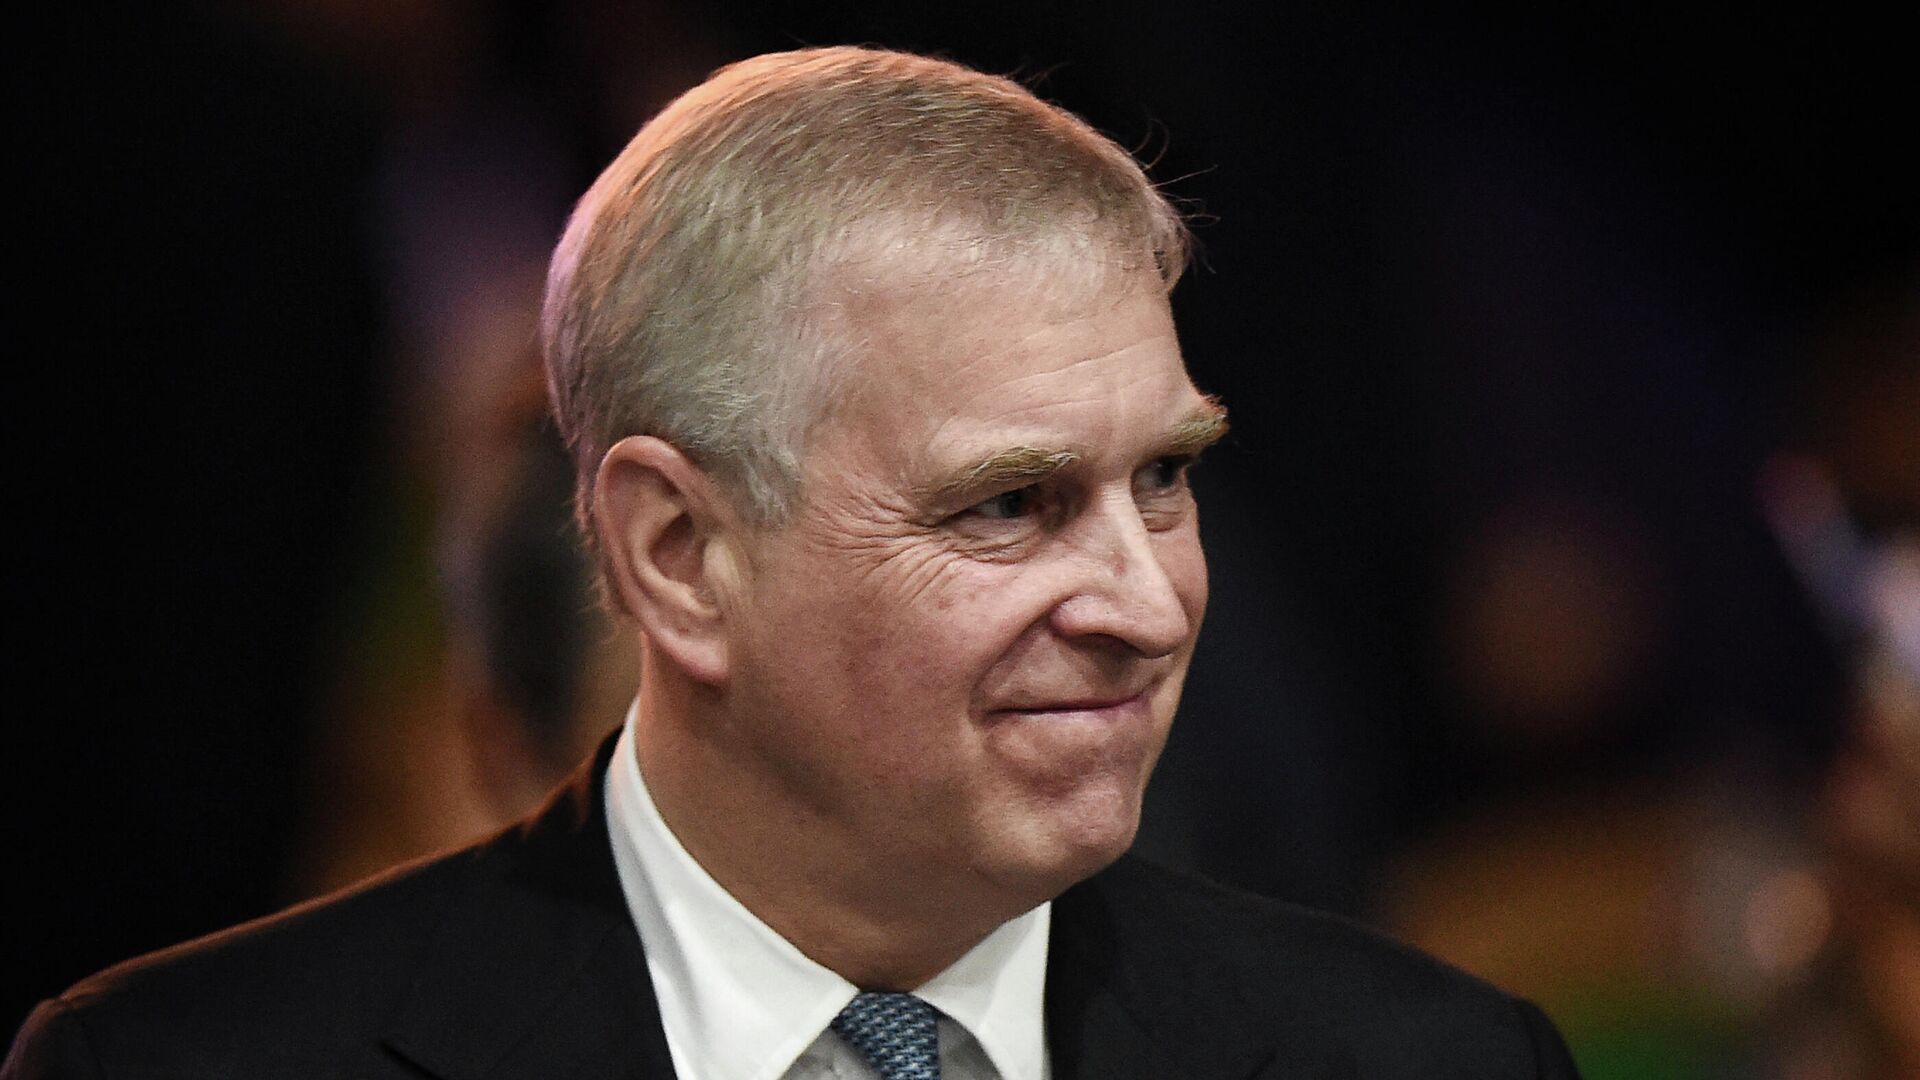 Britain's Prince Andrew, Duke of York leaves after speaking at the ASEAN Business and Investment Summit in Bangkok on November 3, 2019 - Sputnik International, 1920, 12.09.2021